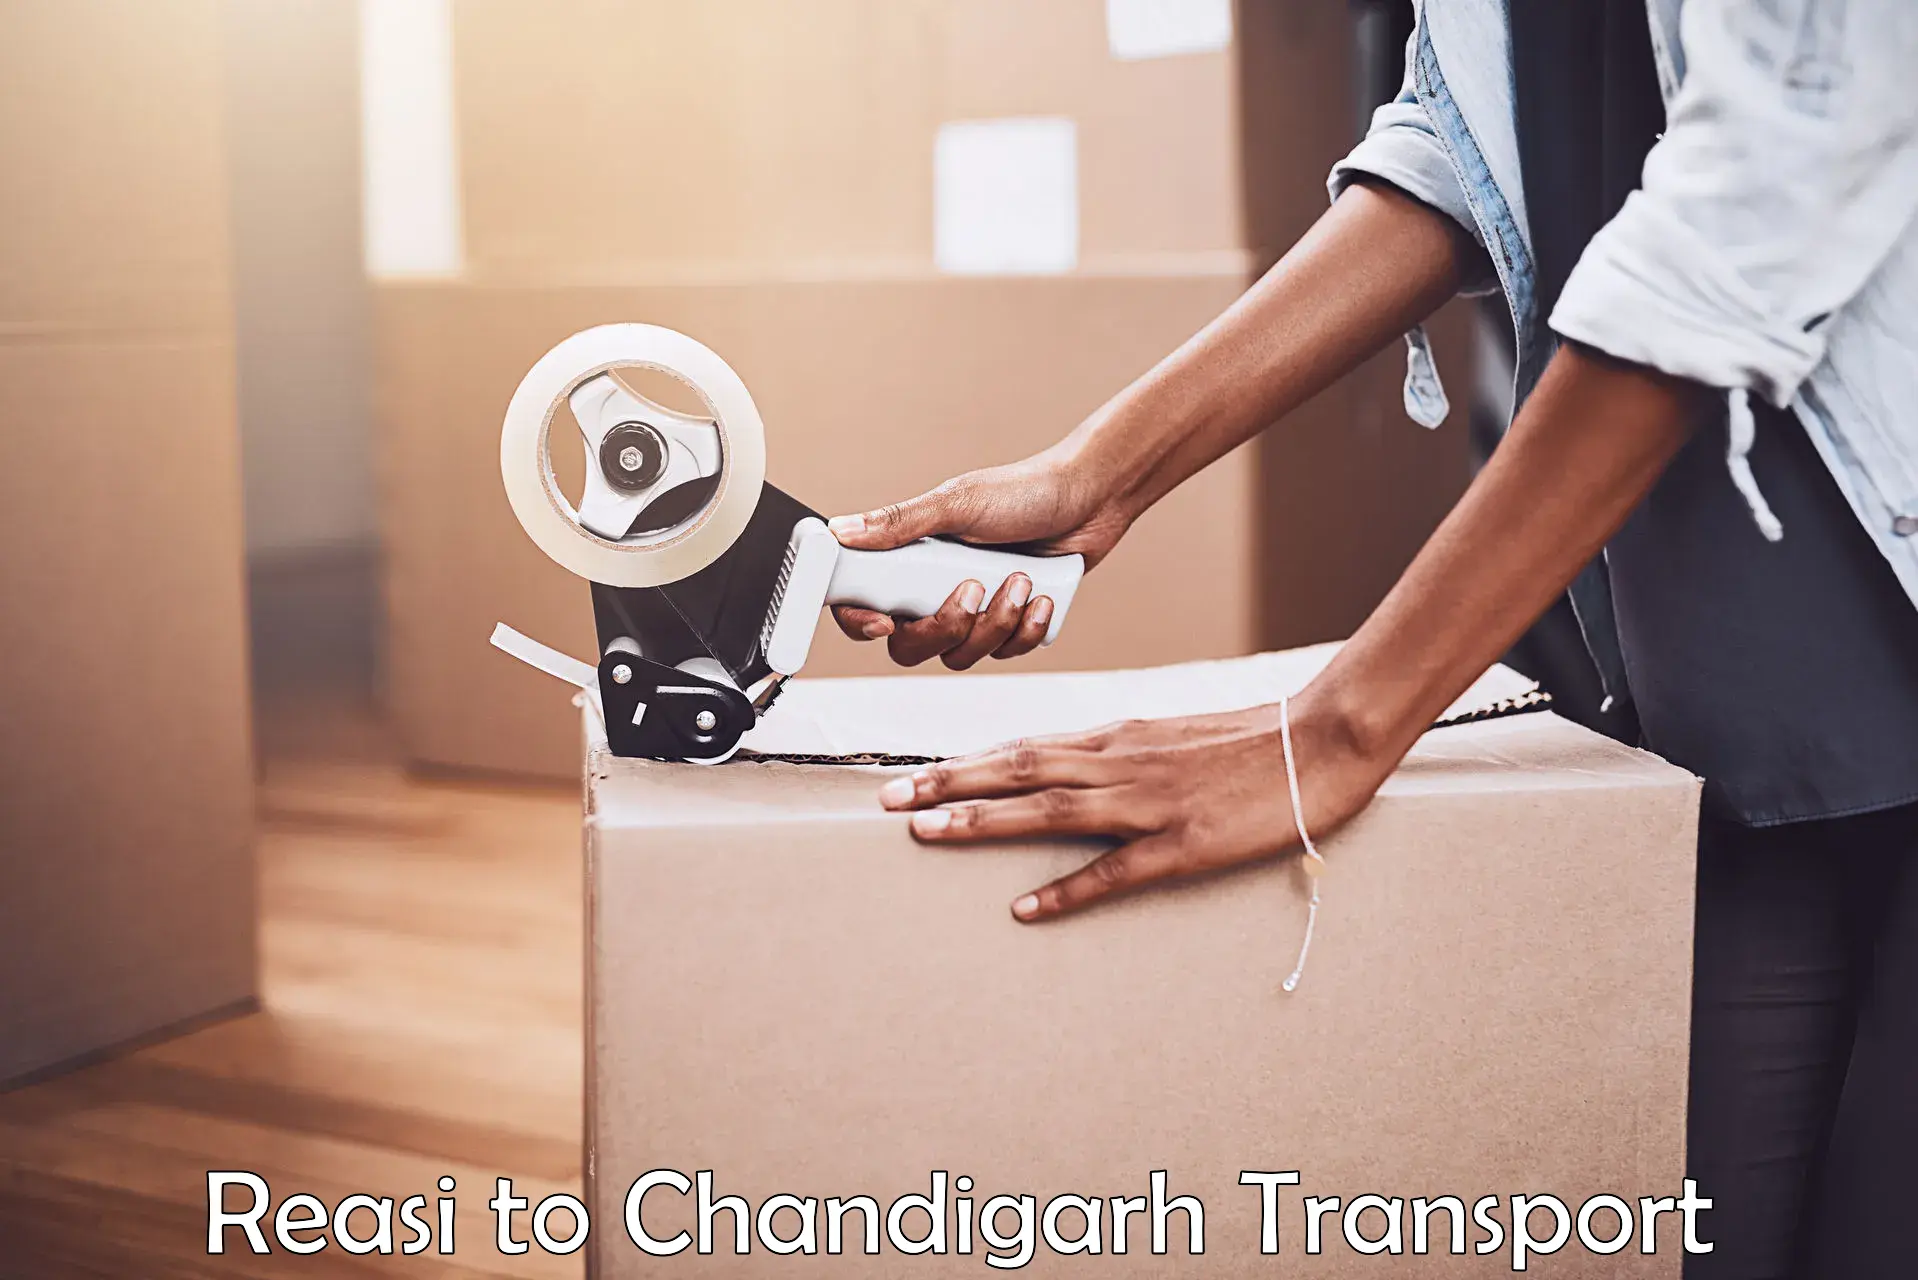 Truck transport companies in India Reasi to Chandigarh